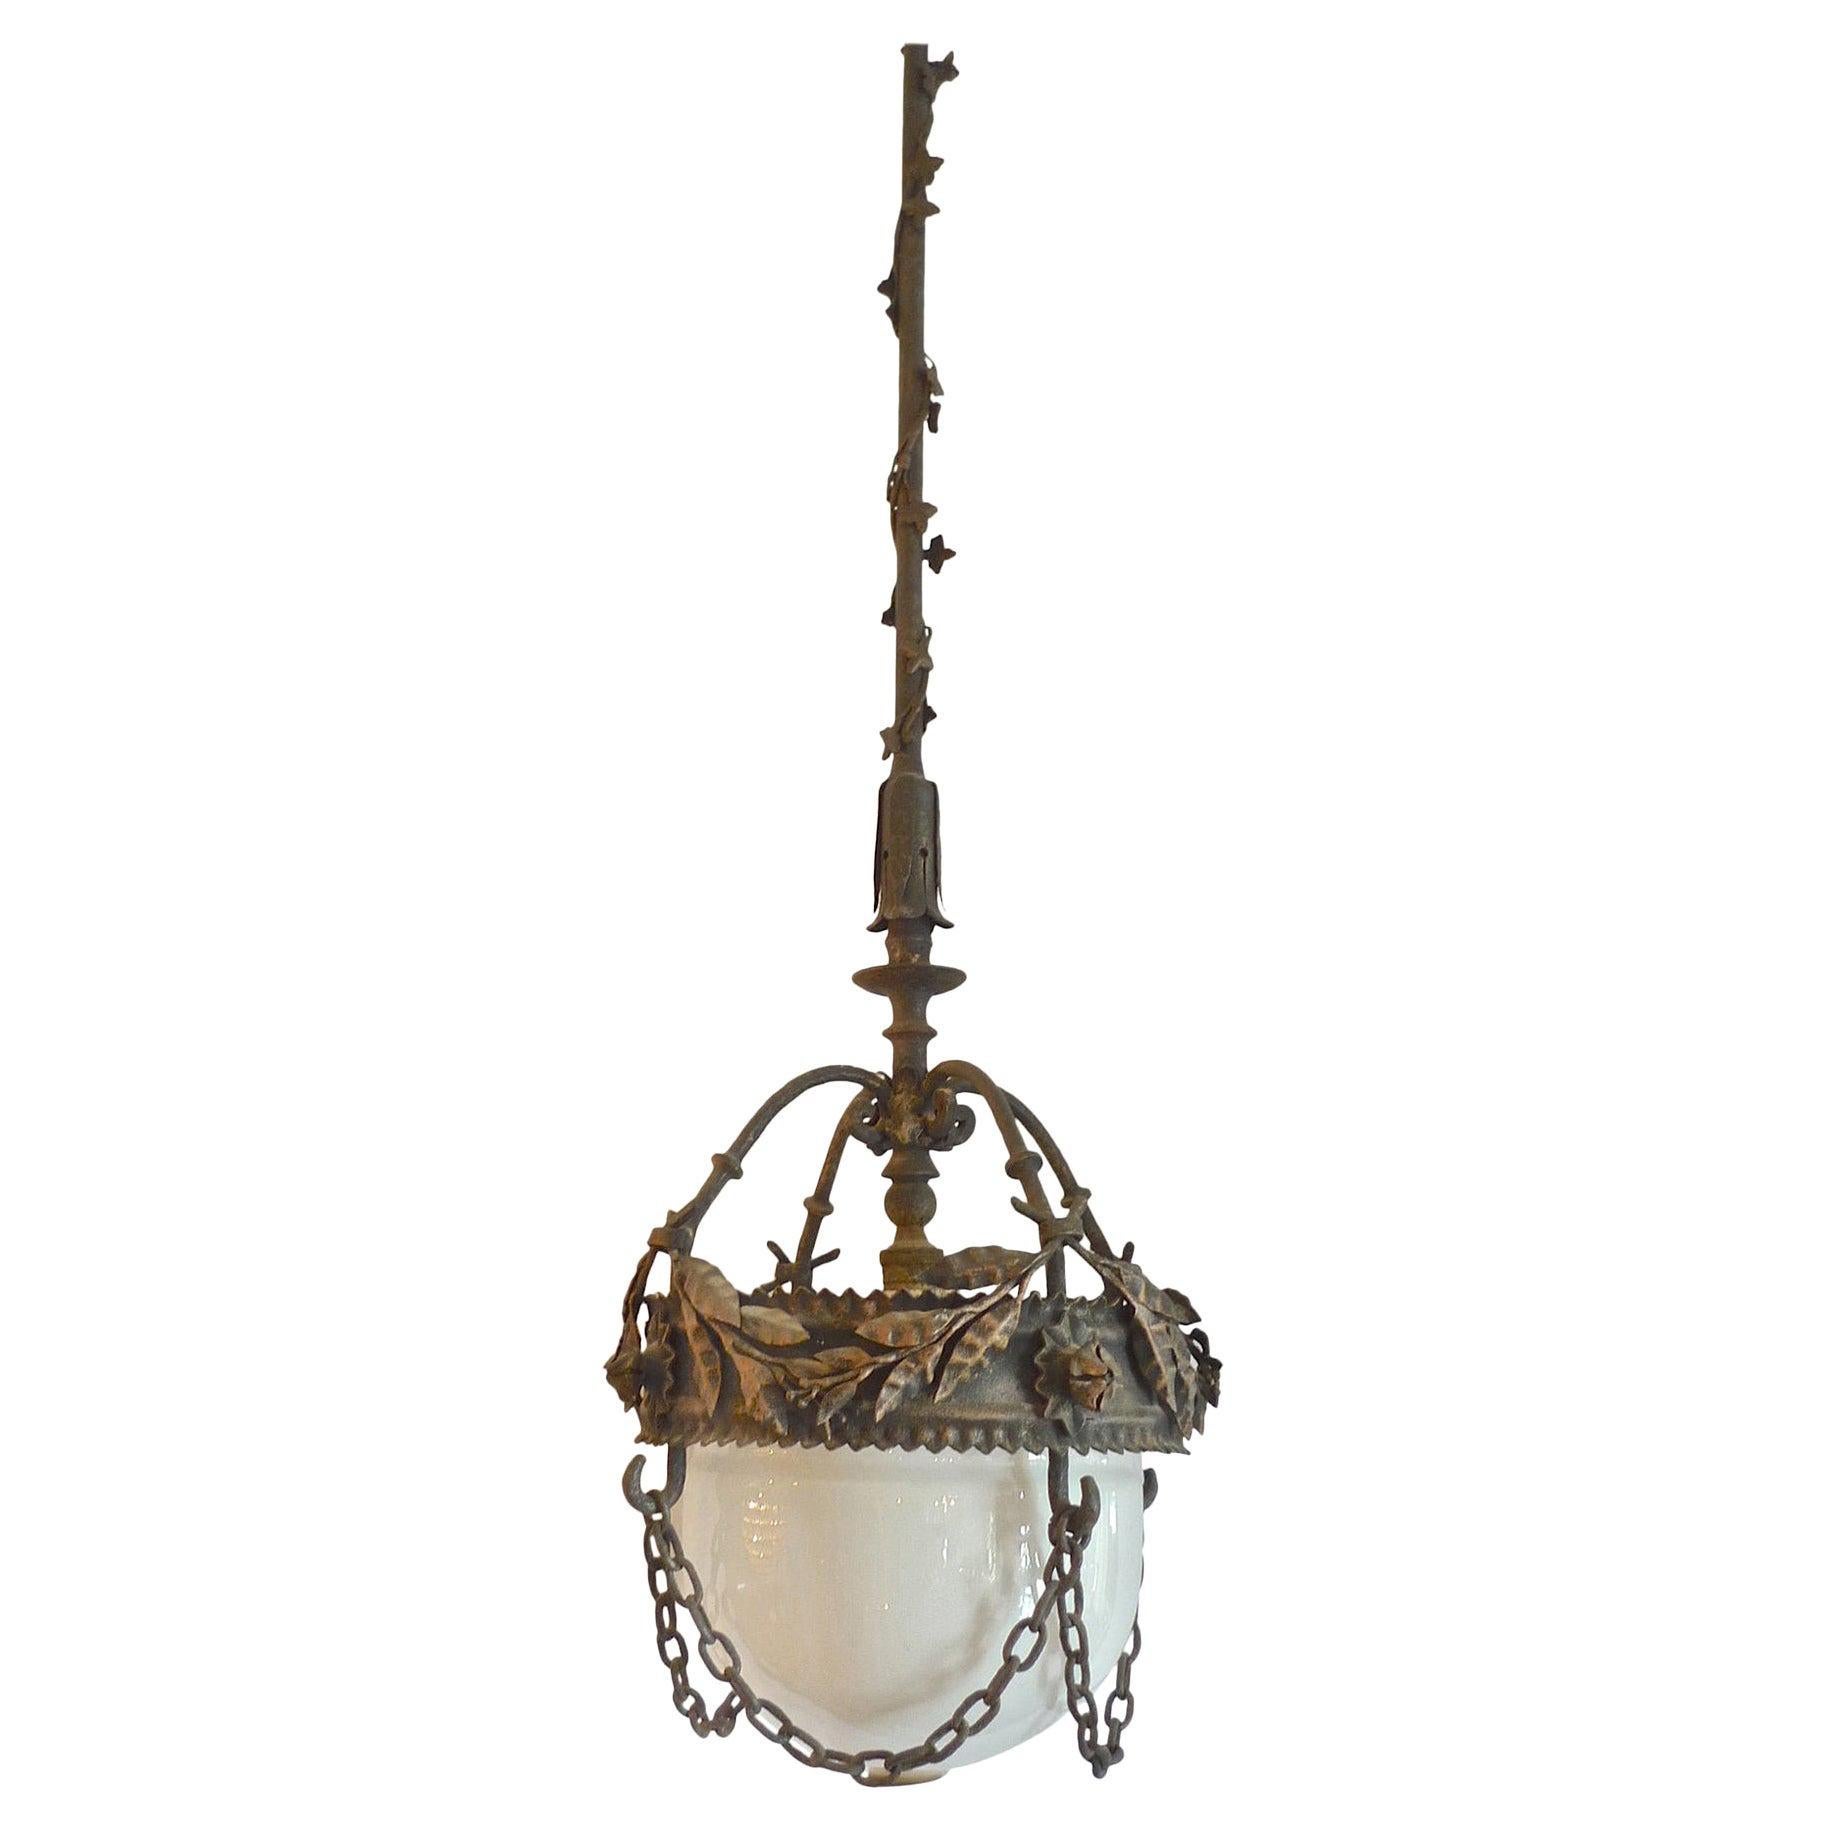 French 1930s Cast Iron Pendant with Milk Glass Shade and Chain Surround